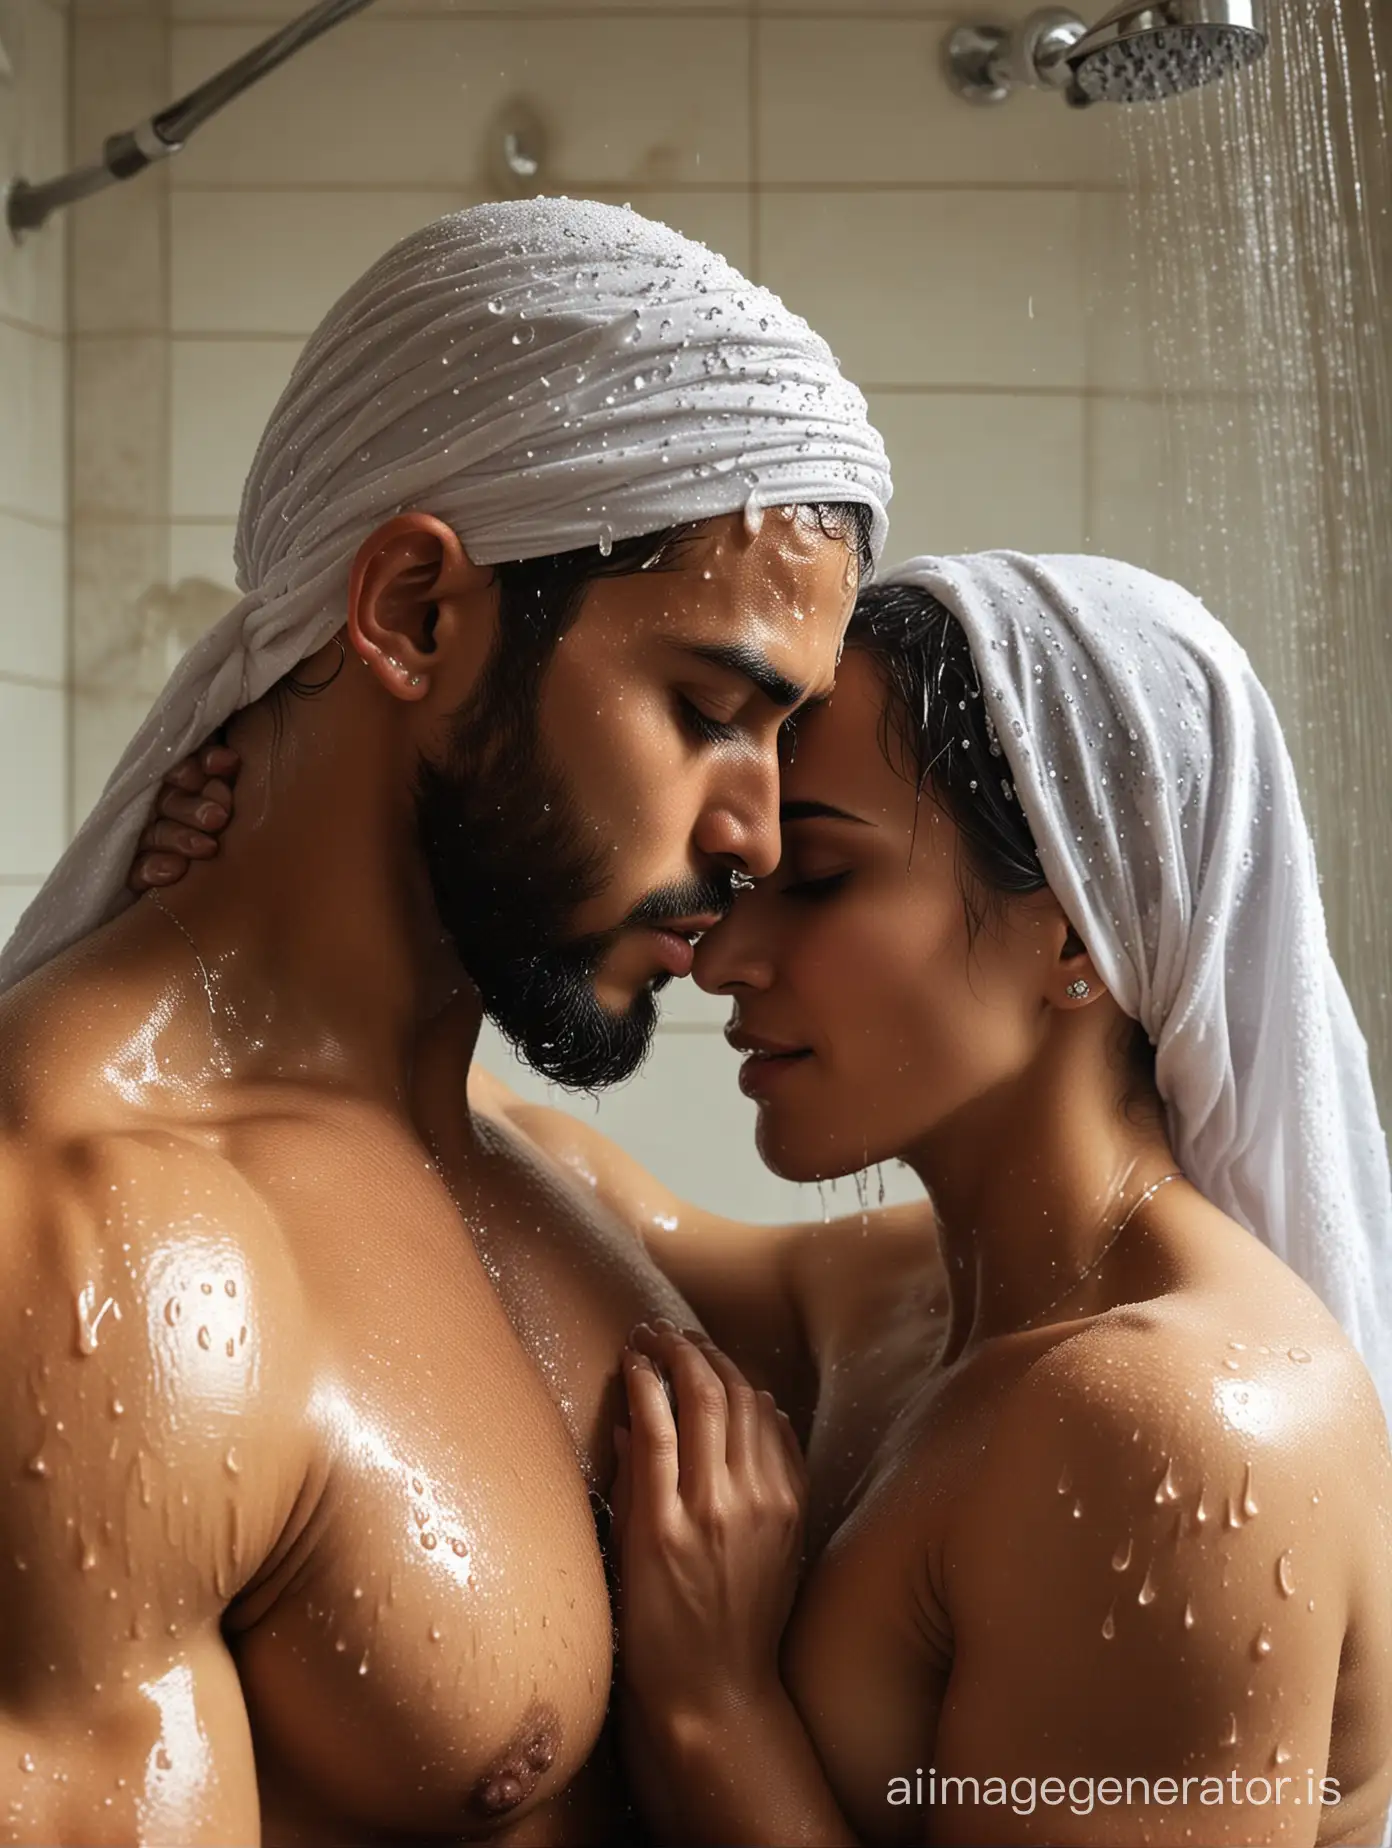 An intimate moment between two highly-muscled and toned Christian male and Muslim female bodybuilders in a luxurious shower. The Christian male, his head covered by a traditional Jewish kippah, and his piercing eyes gazing deeply into those of his female Muslim counterpart, tenderly embraces her as they share a passionate kiss. The Muslim woman, with striking features and head covered by a traditional Muslim hijab, her body adorned only by a few strategically placed droplets of water, reciprocates his affection, wrapping her strong arms around his broad shoulders. In the background, the gleaming chrome and tiled walls of the shower create a sense of opulence and warmth, while steam rises up around them,